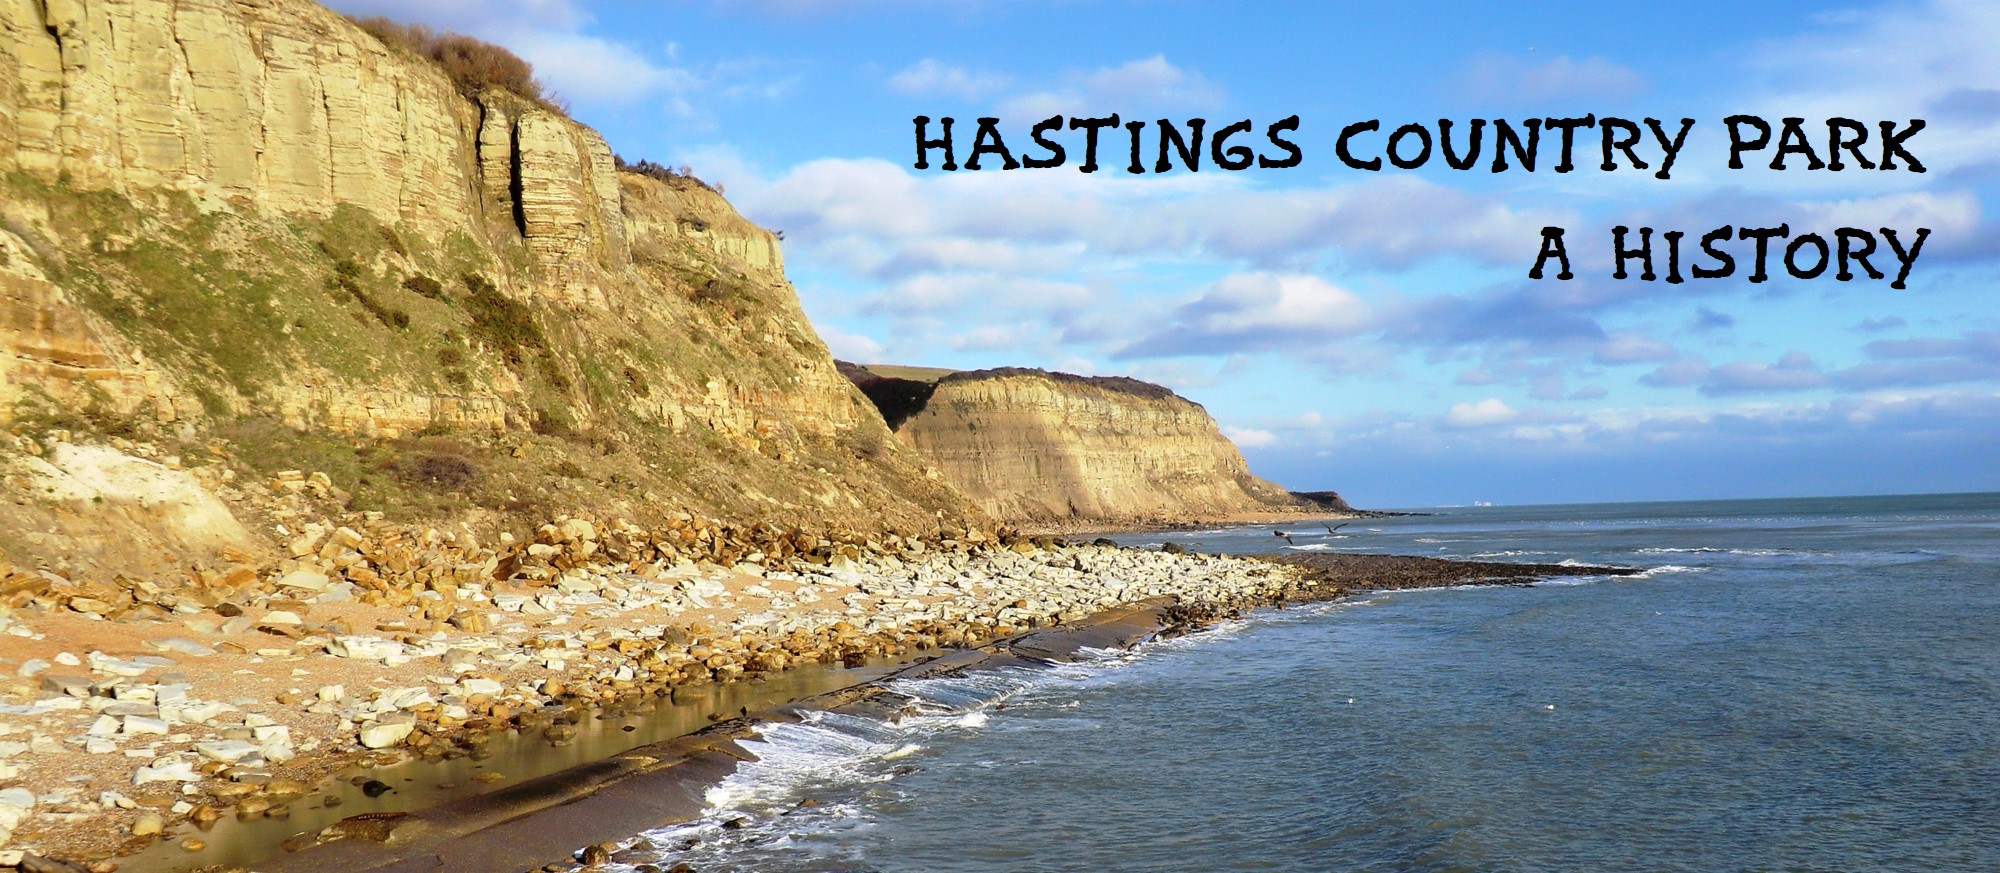 A History of Hastings Country Park